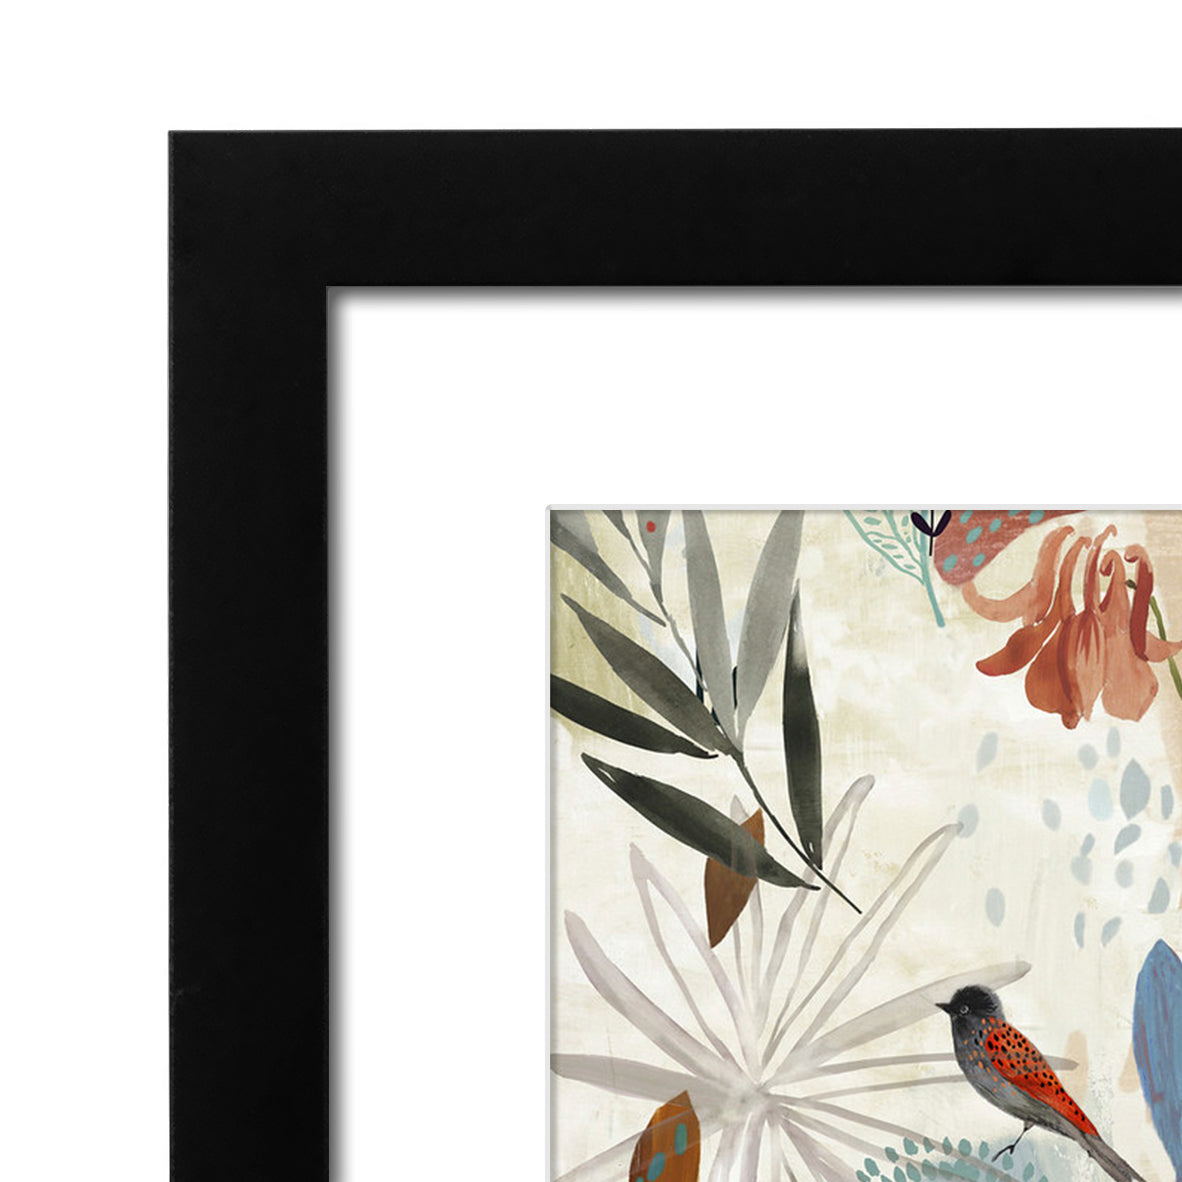 Dreamy Floral Forest - 8 Piece Framed Gallery Wall Art Set - Americanflat